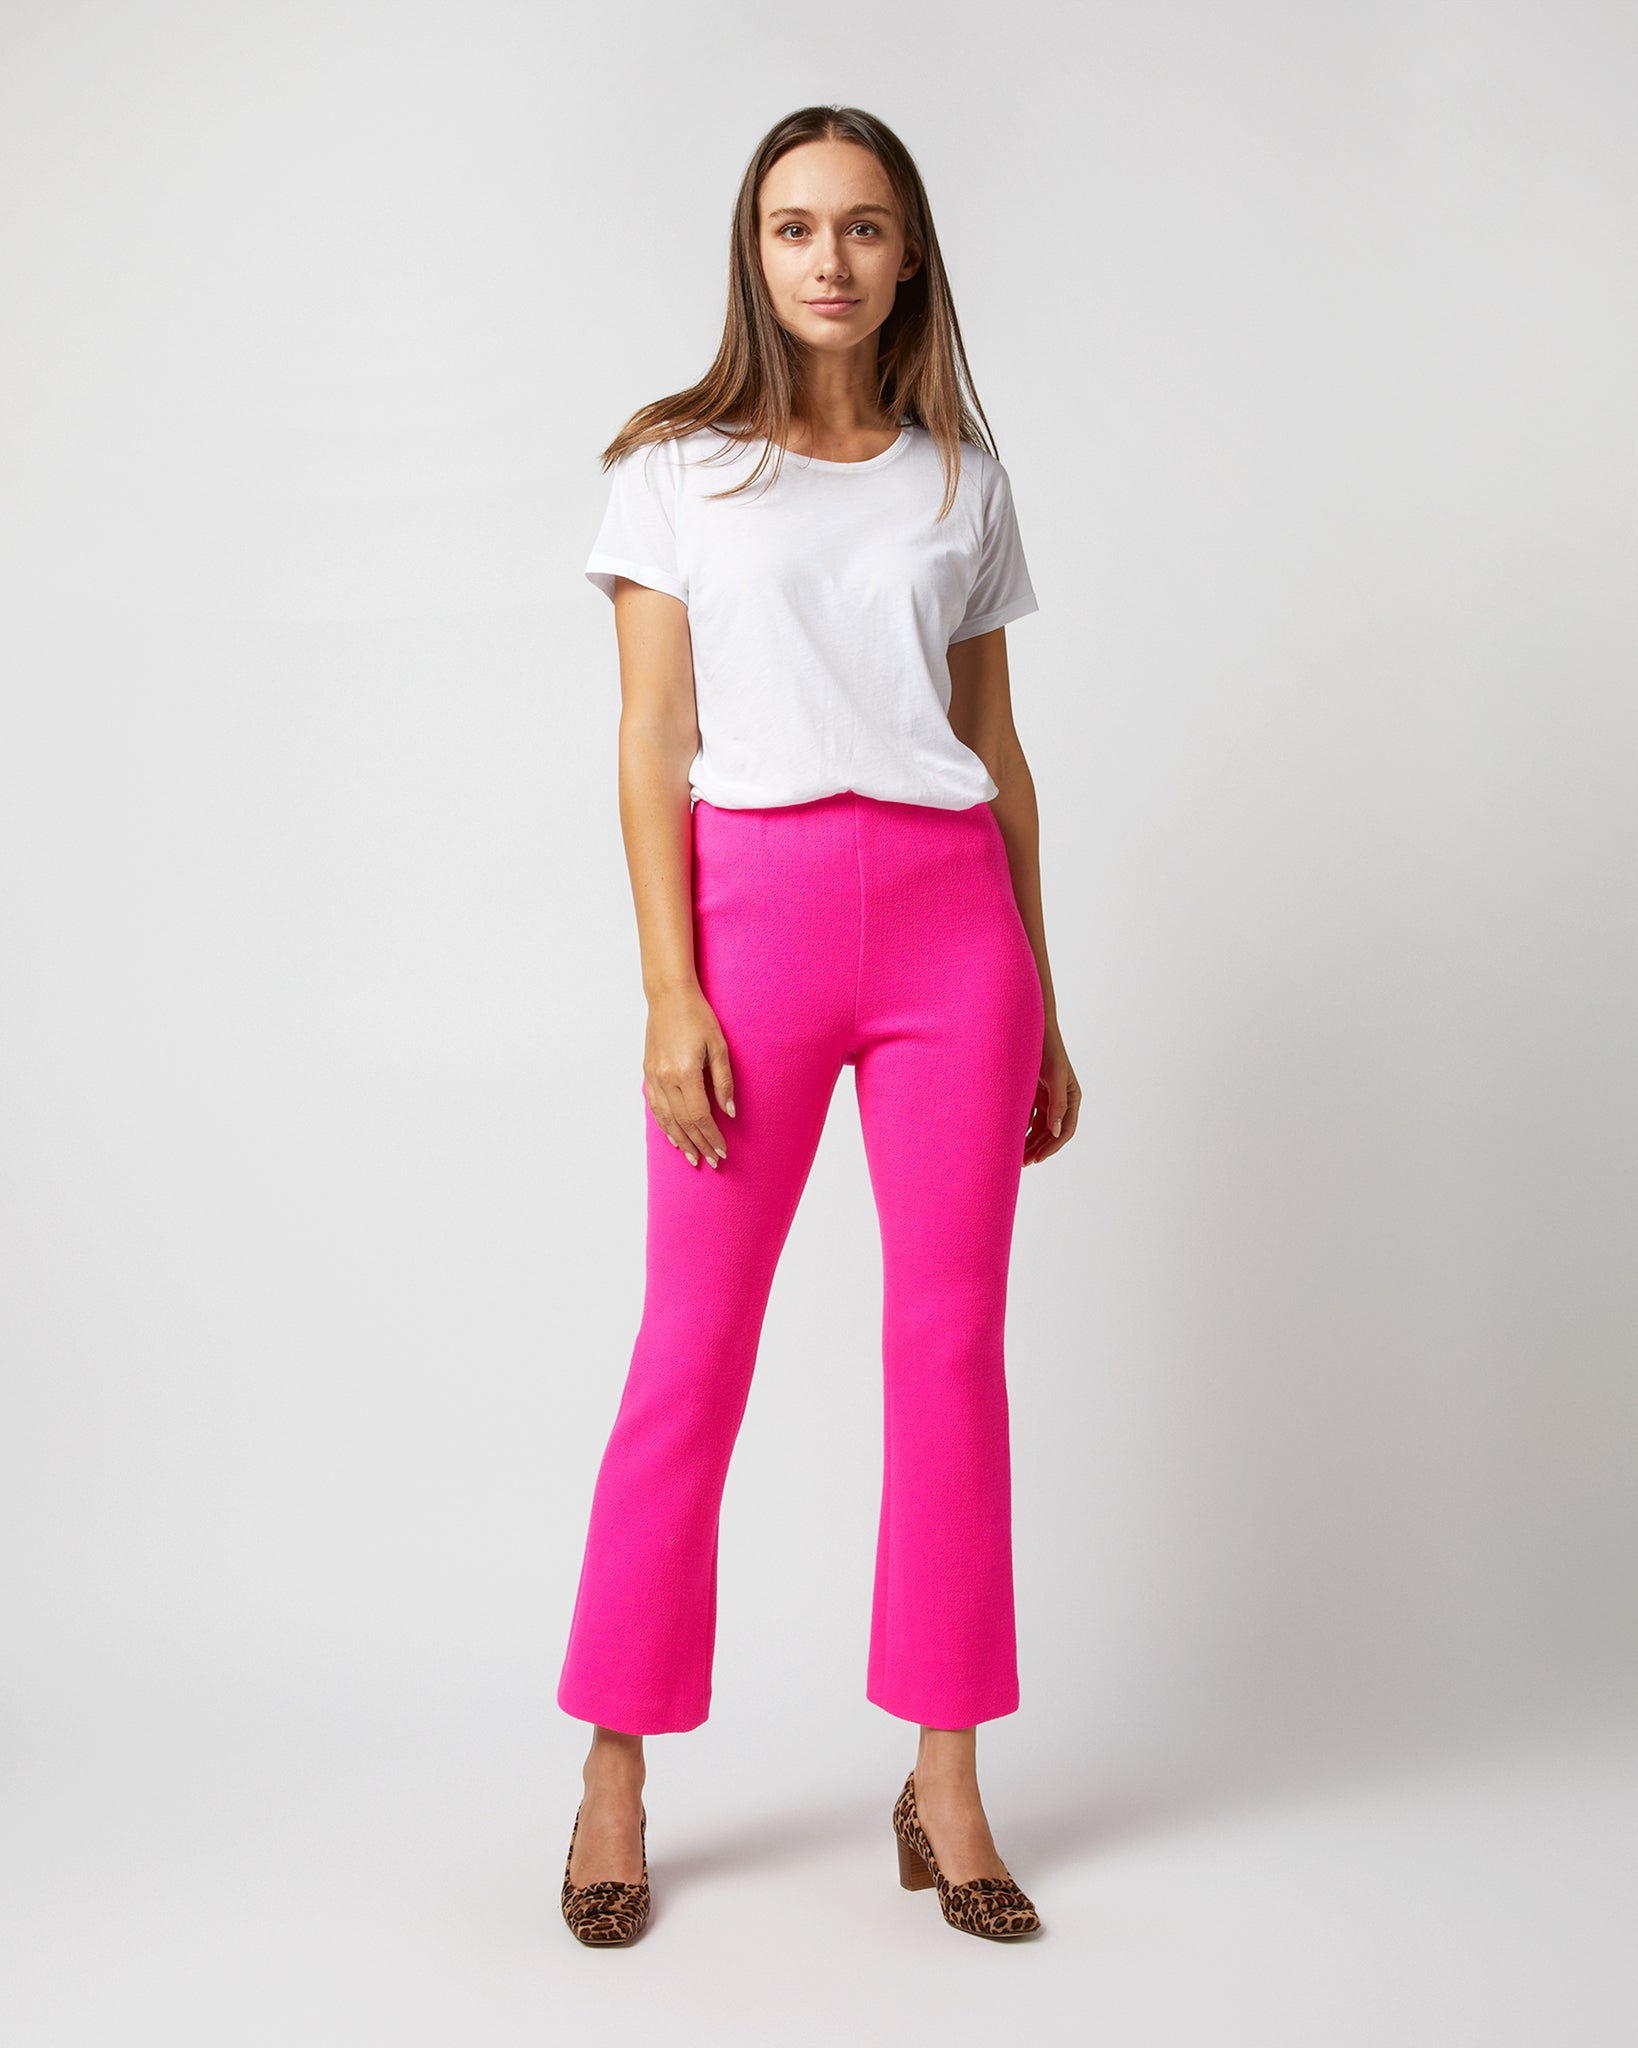 Ann Mashburn Faye Flare Cropped Pant in Fluorescent Pink Stretch Wool Crepe